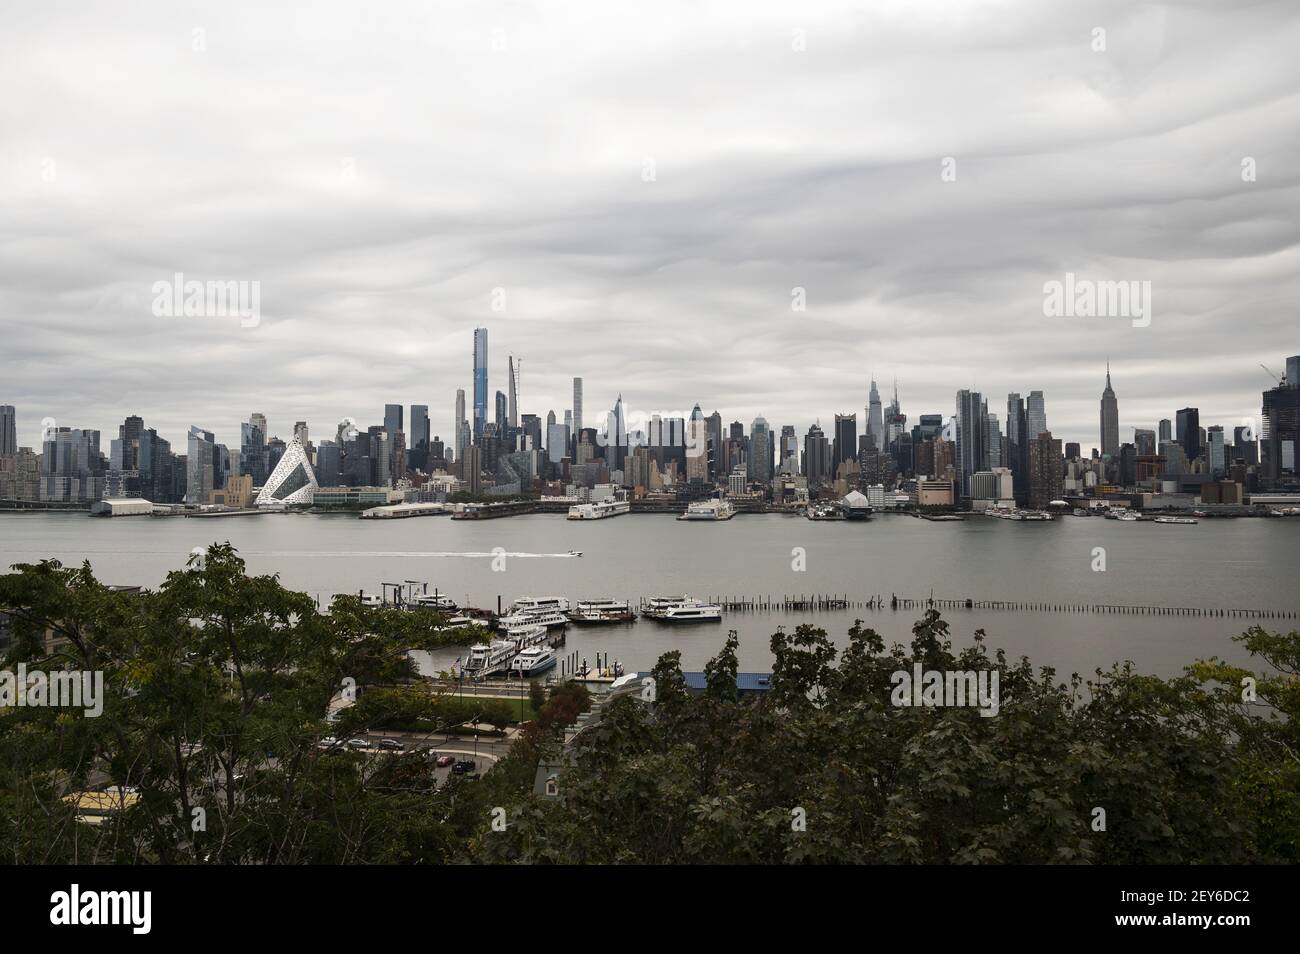 Midtown Manhattan skyline on a cloudy day as seen from the Jersey side of the Hudson River Stock Photo